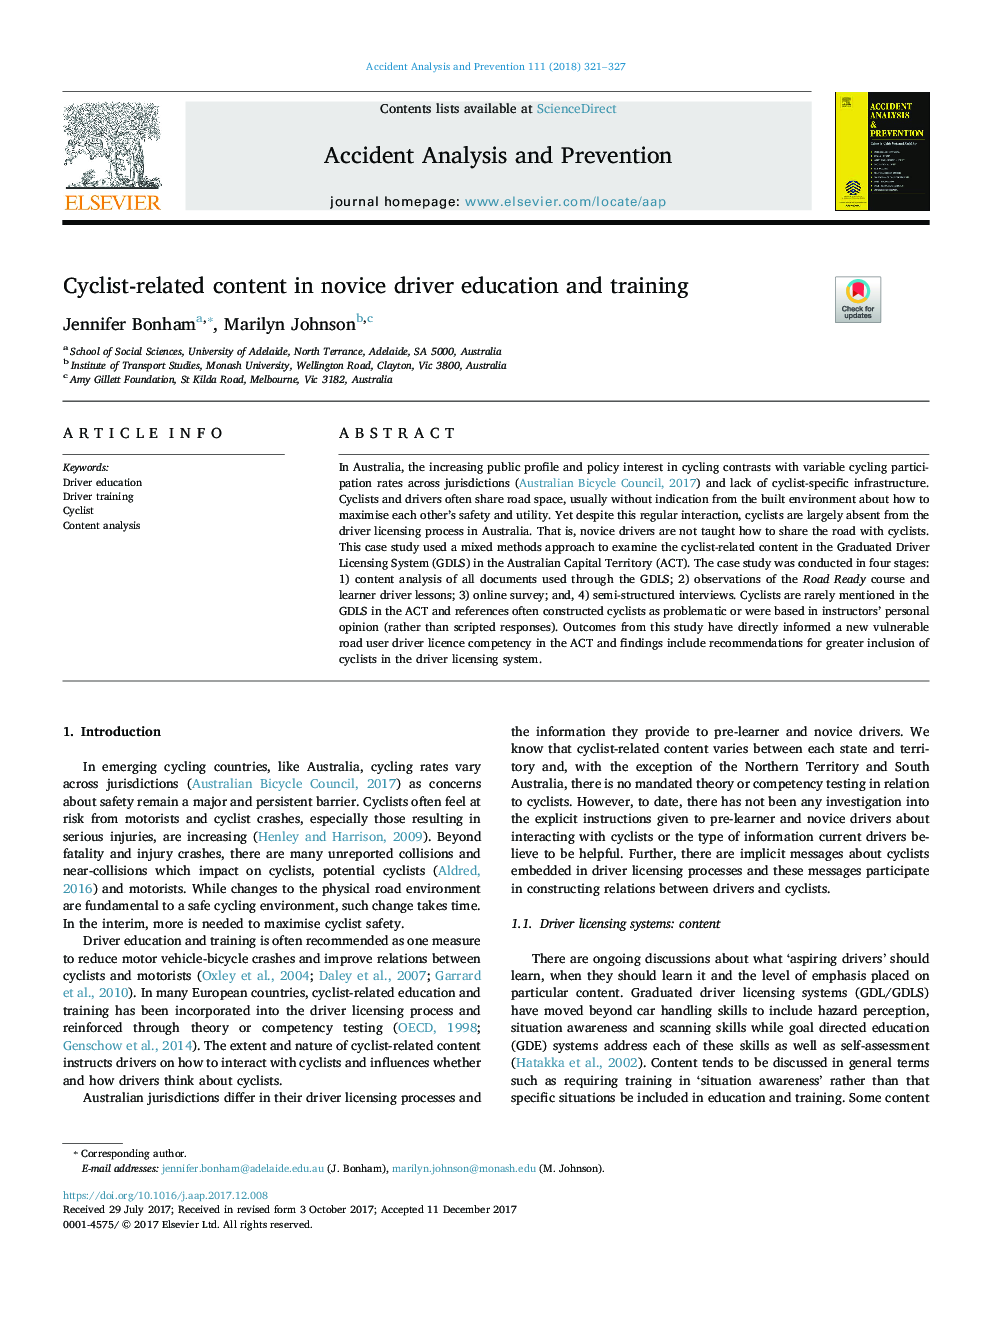 Cyclist-related content in novice driver education and training